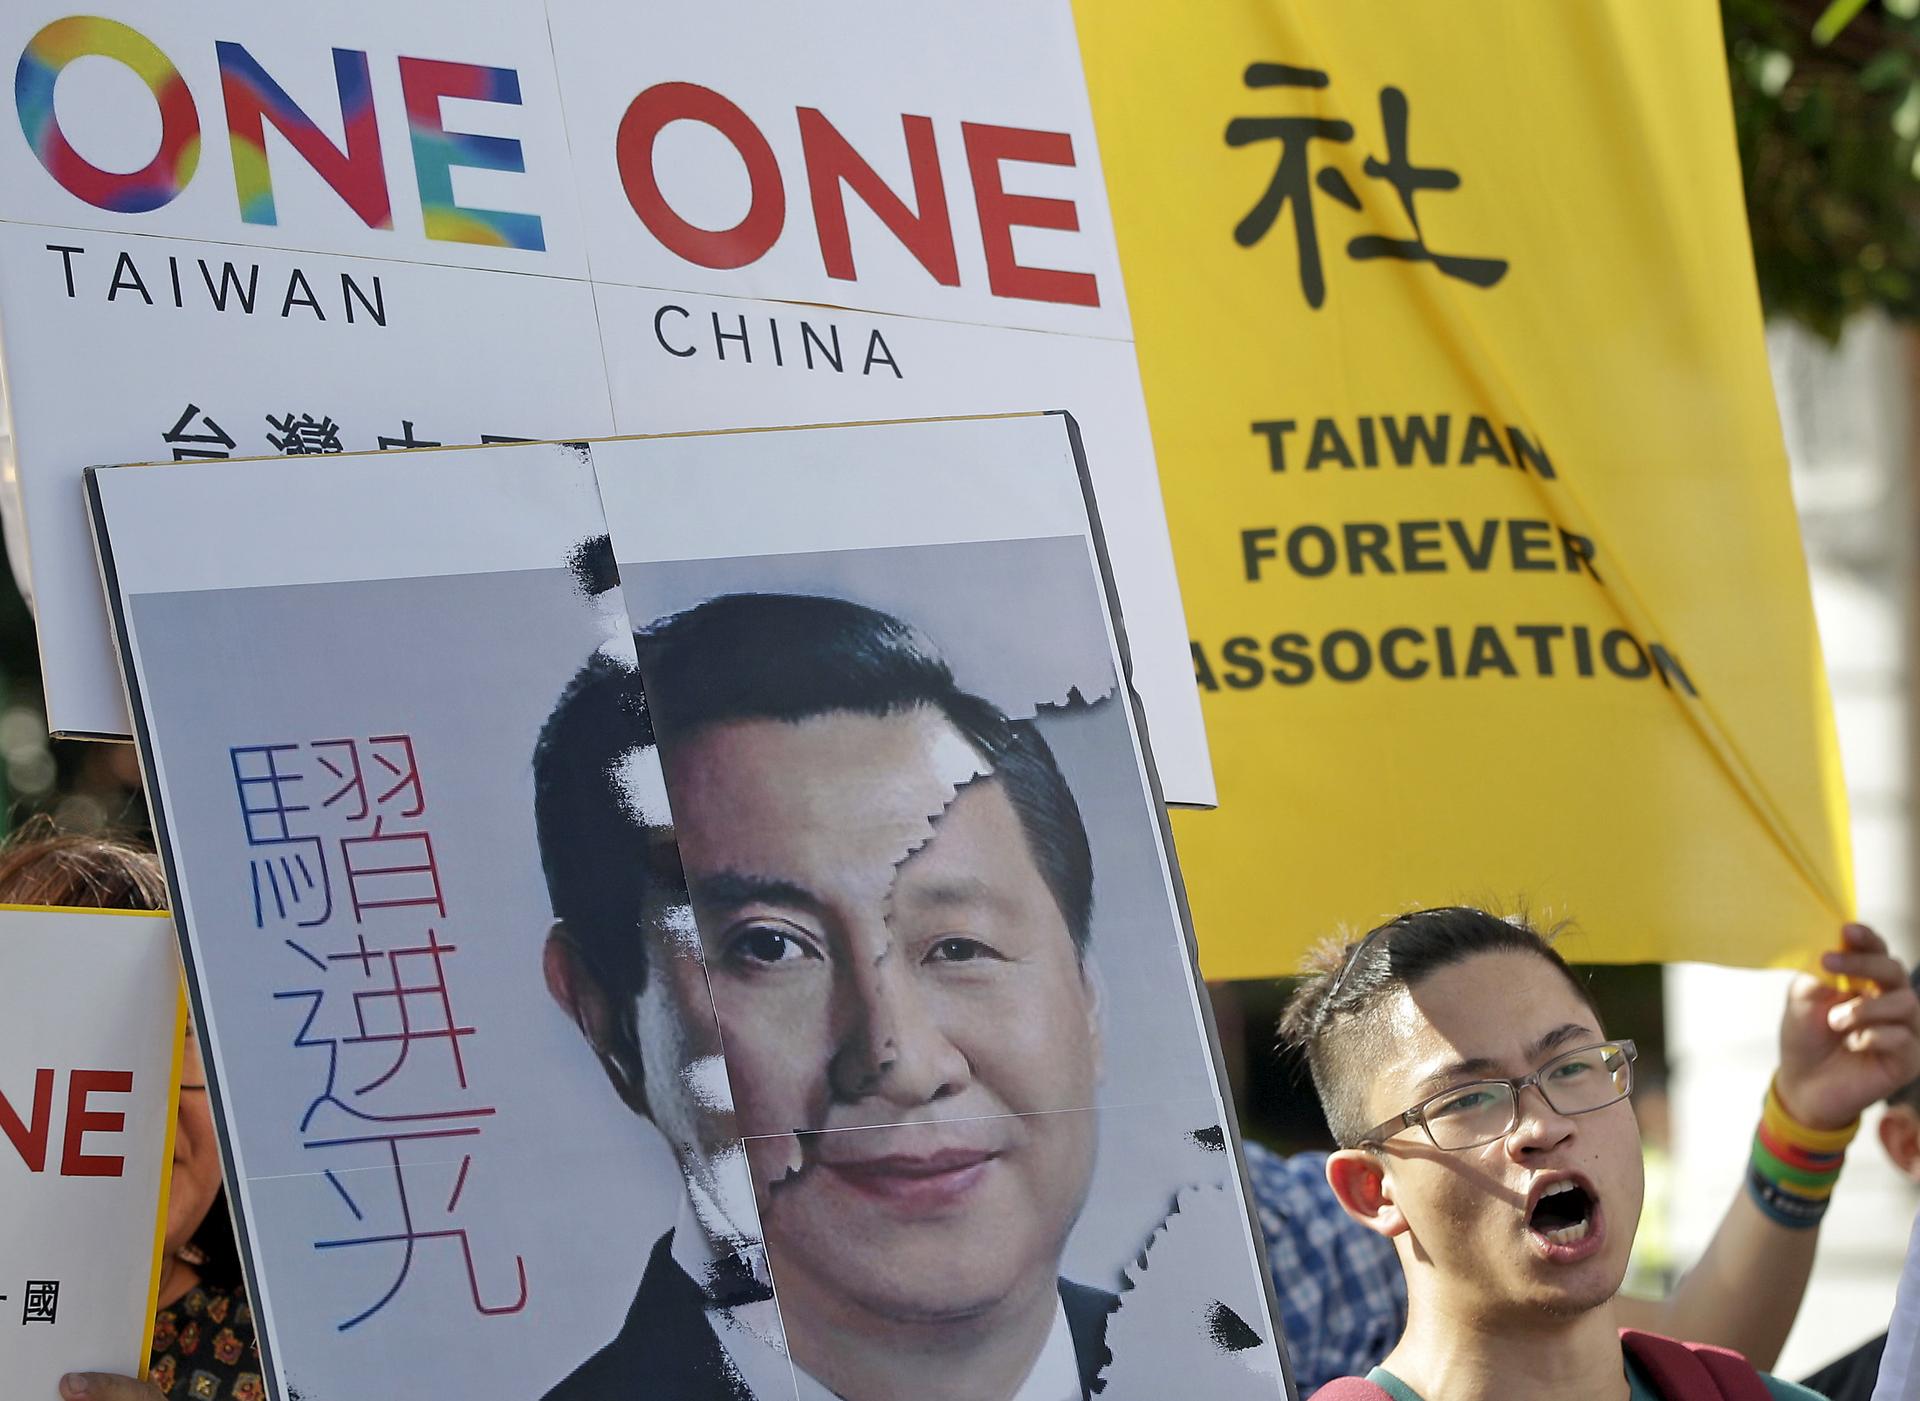 An activist holds a placard showing the merged faces of Taiwan's President Ma Ying-jeou and China's President Xi Jinping, to protest against the upcoming Singapore summit meeting between the two leaders.